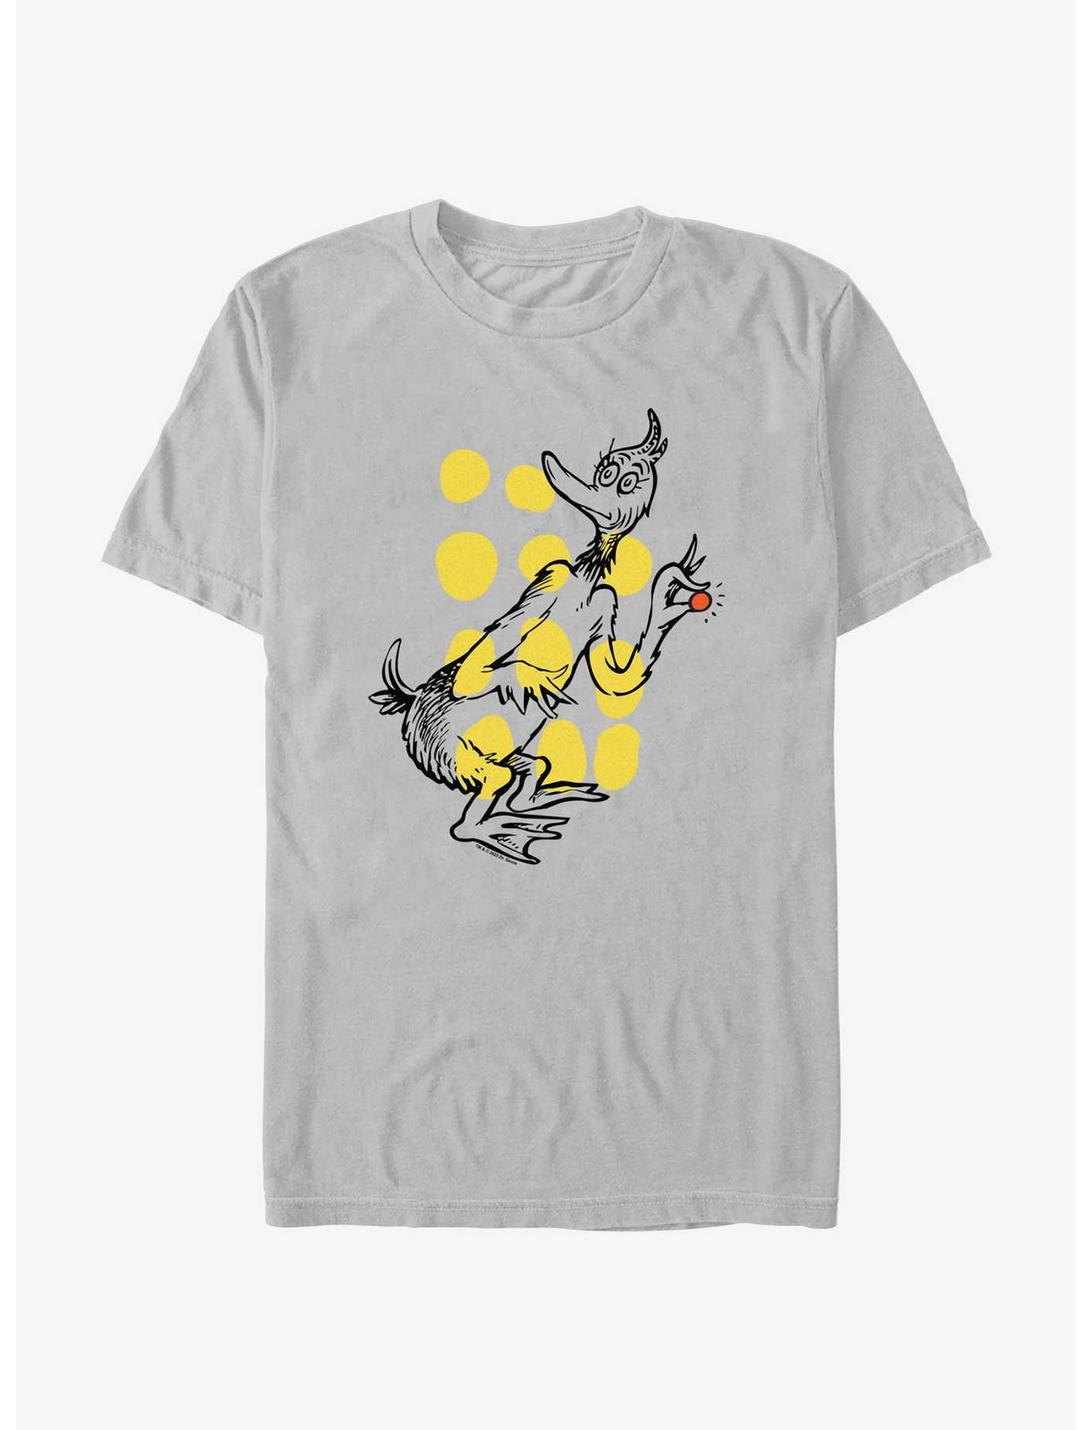 Dr. Seuss's The Bippolo Seed & Other Lost Stories Mccluck And Bippolo Seed T-Shirt, SILVER, hi-res